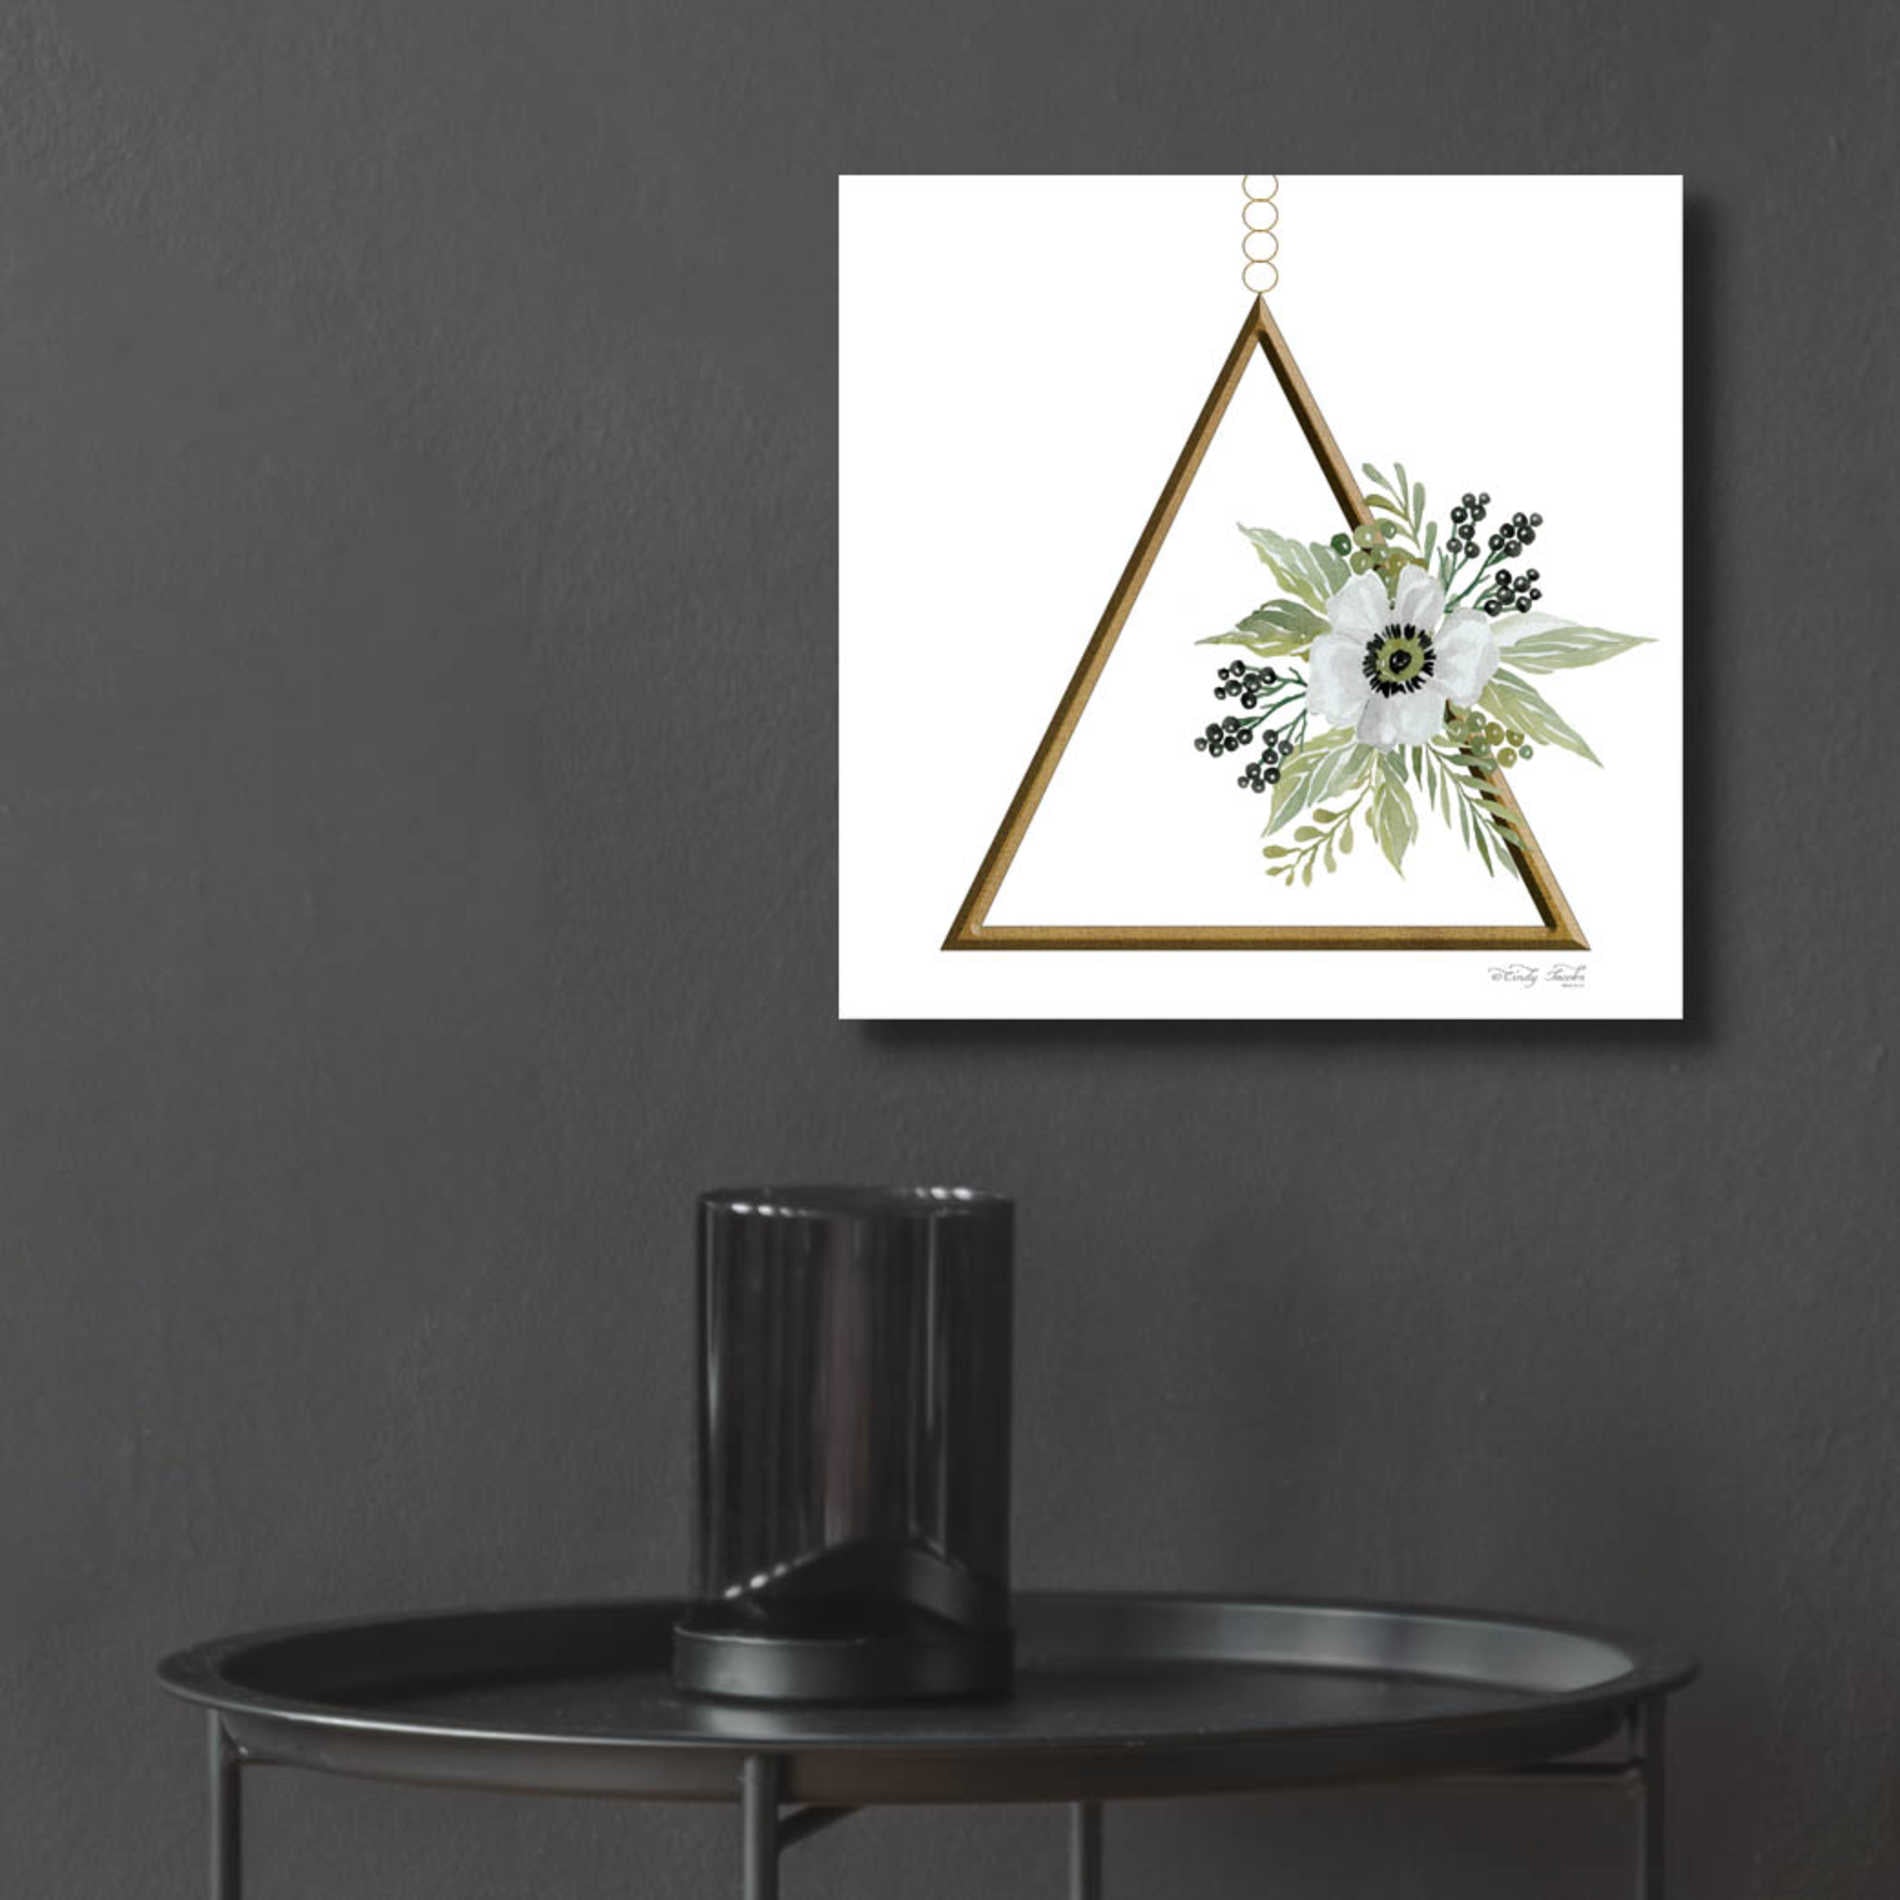 Epic Art 'Geometric Triangle Muted Floral II' by Cindy Jacobs, Acrylic Glass Wall Art,12x12